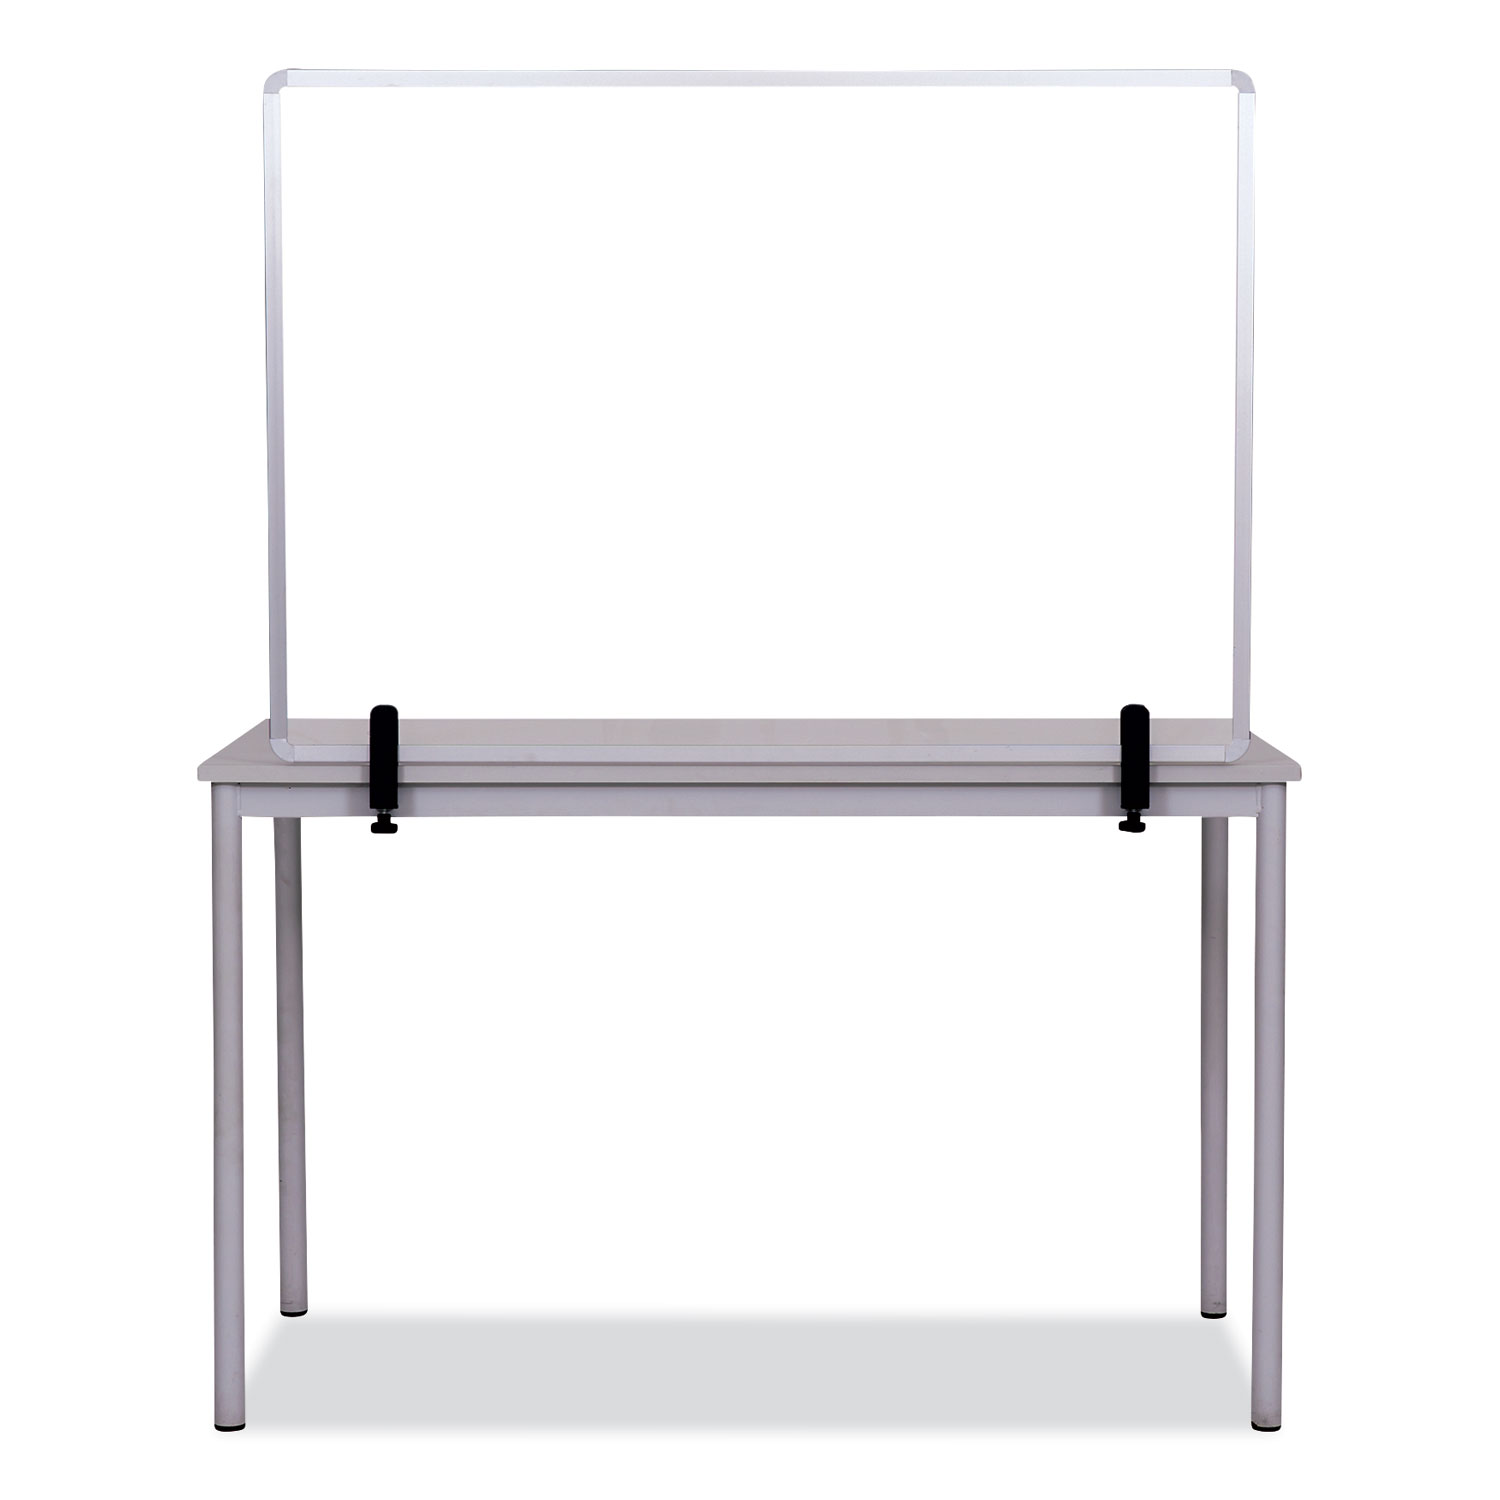 MasterVision® Protector Series Glass Aluminum Desktop Divider, 40.9 x 0.16 x 27.6, Clear